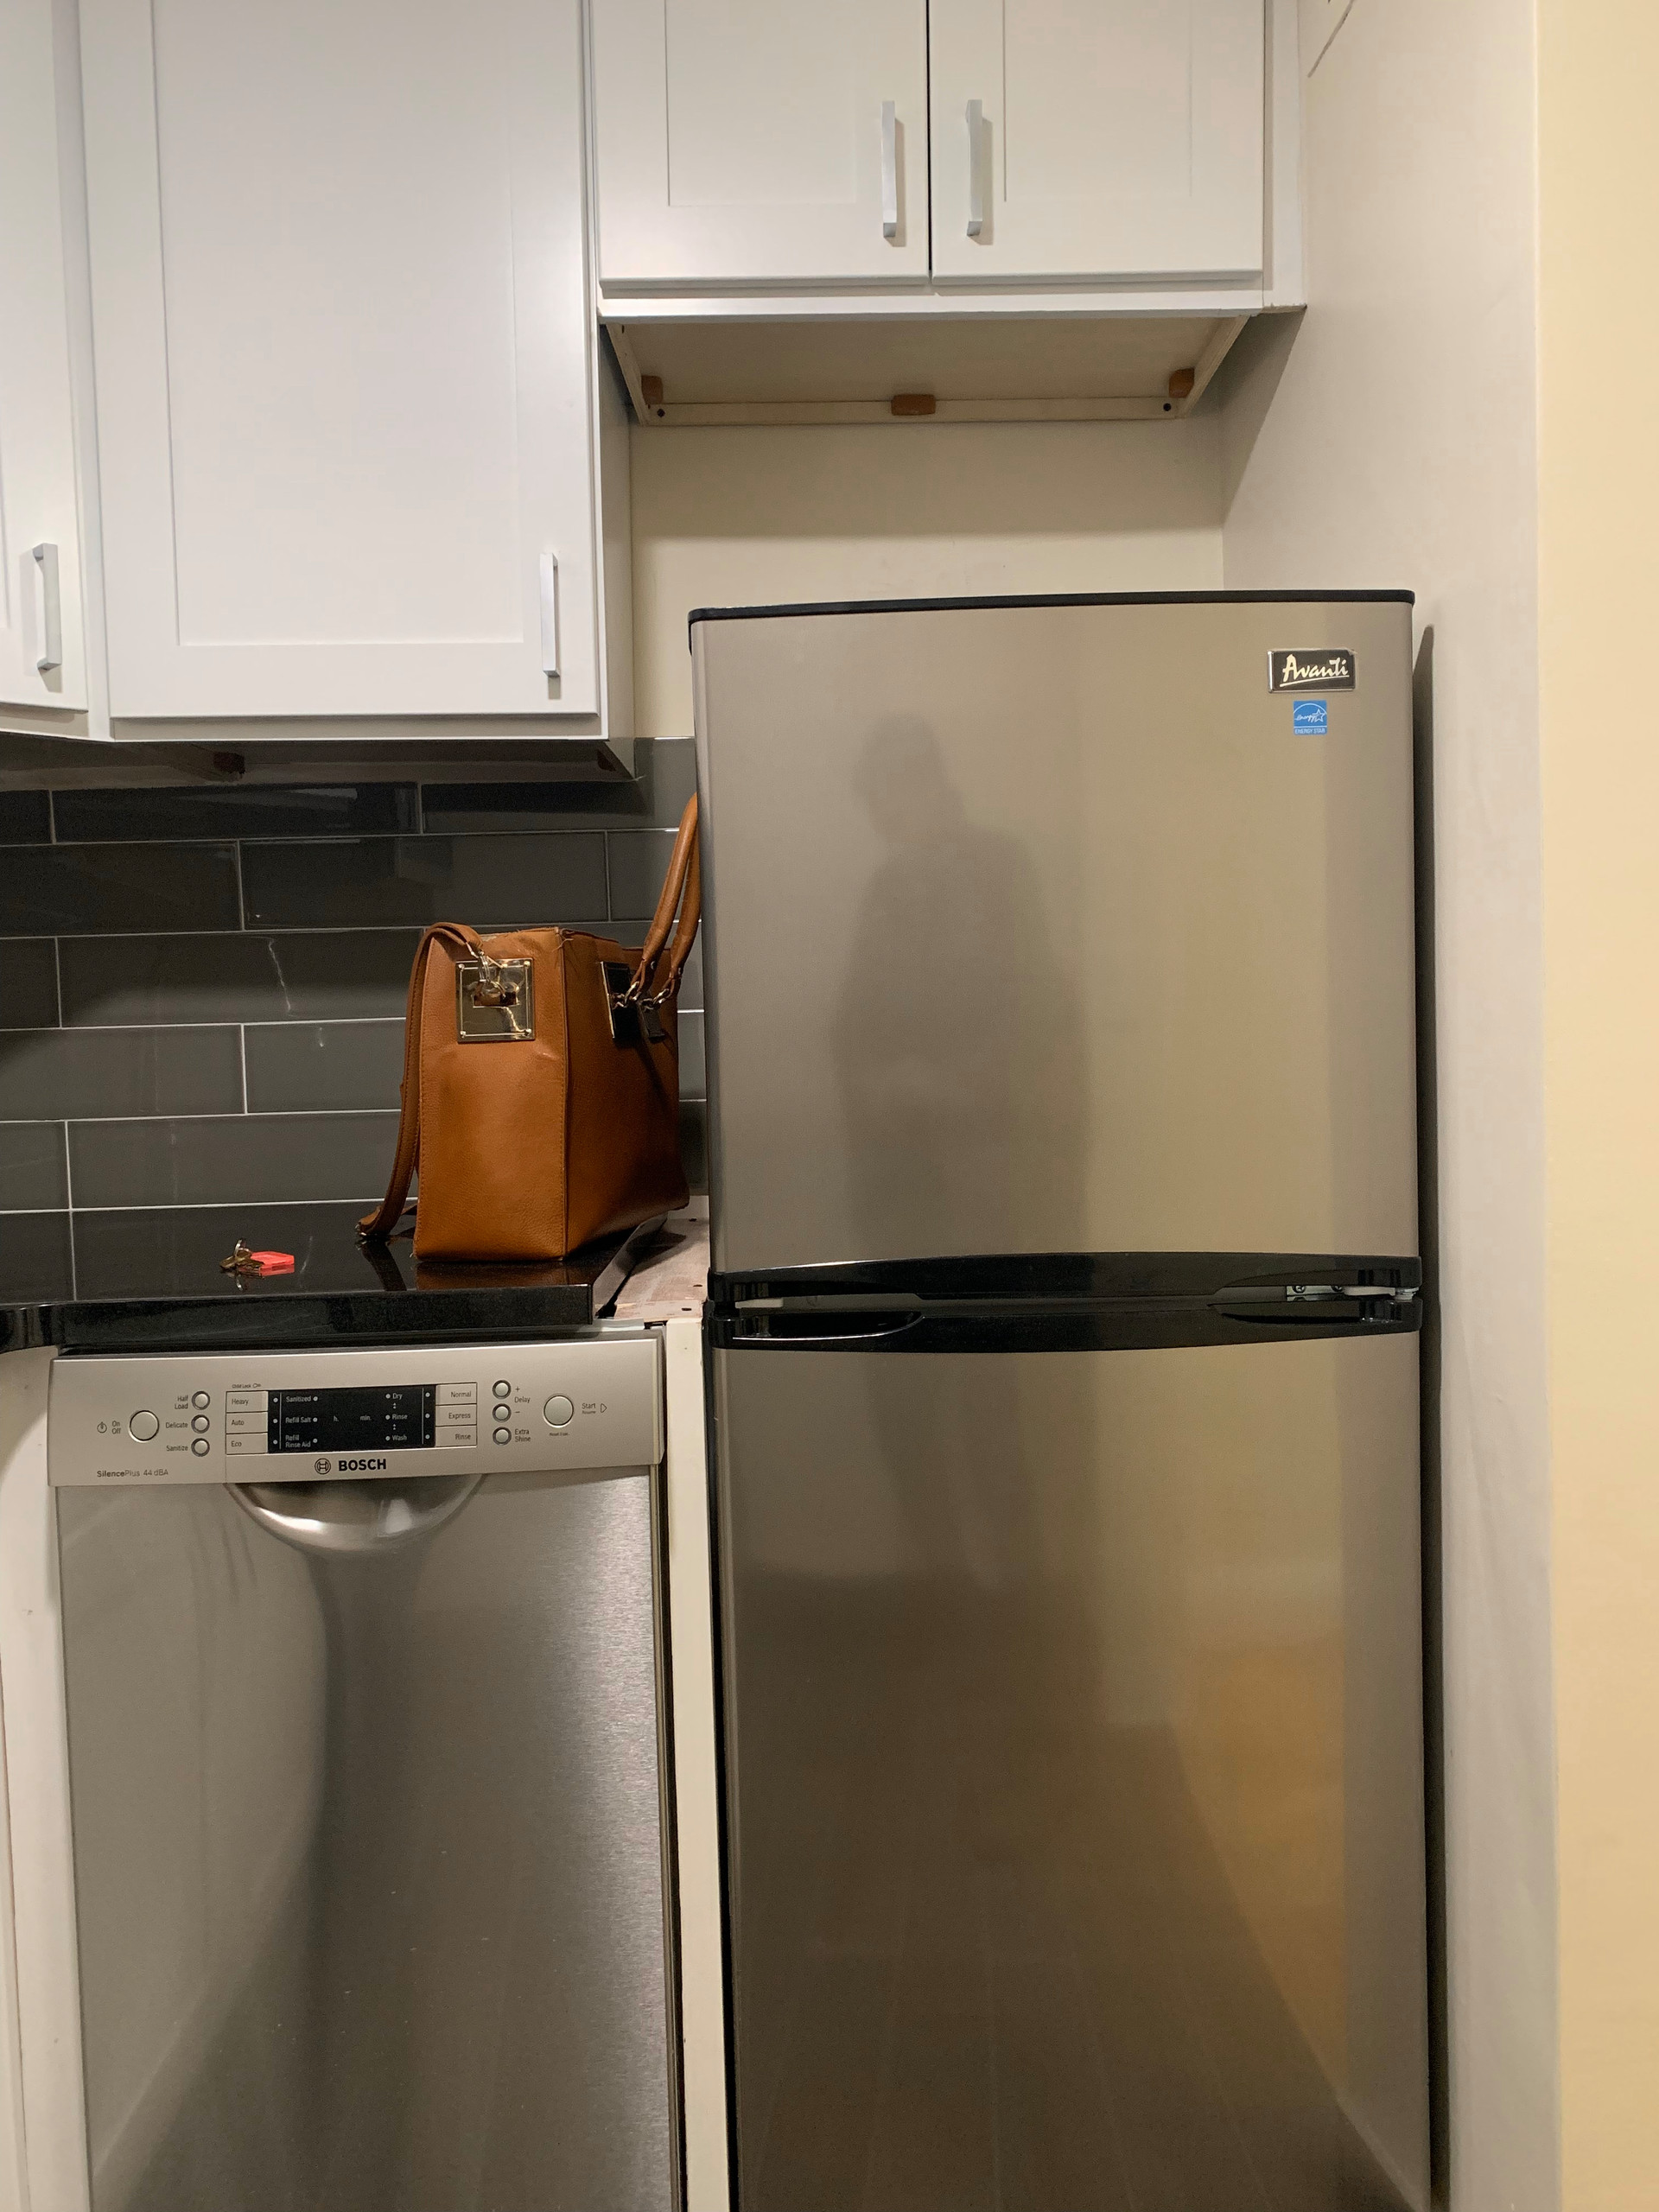 Stainless steel Appliances